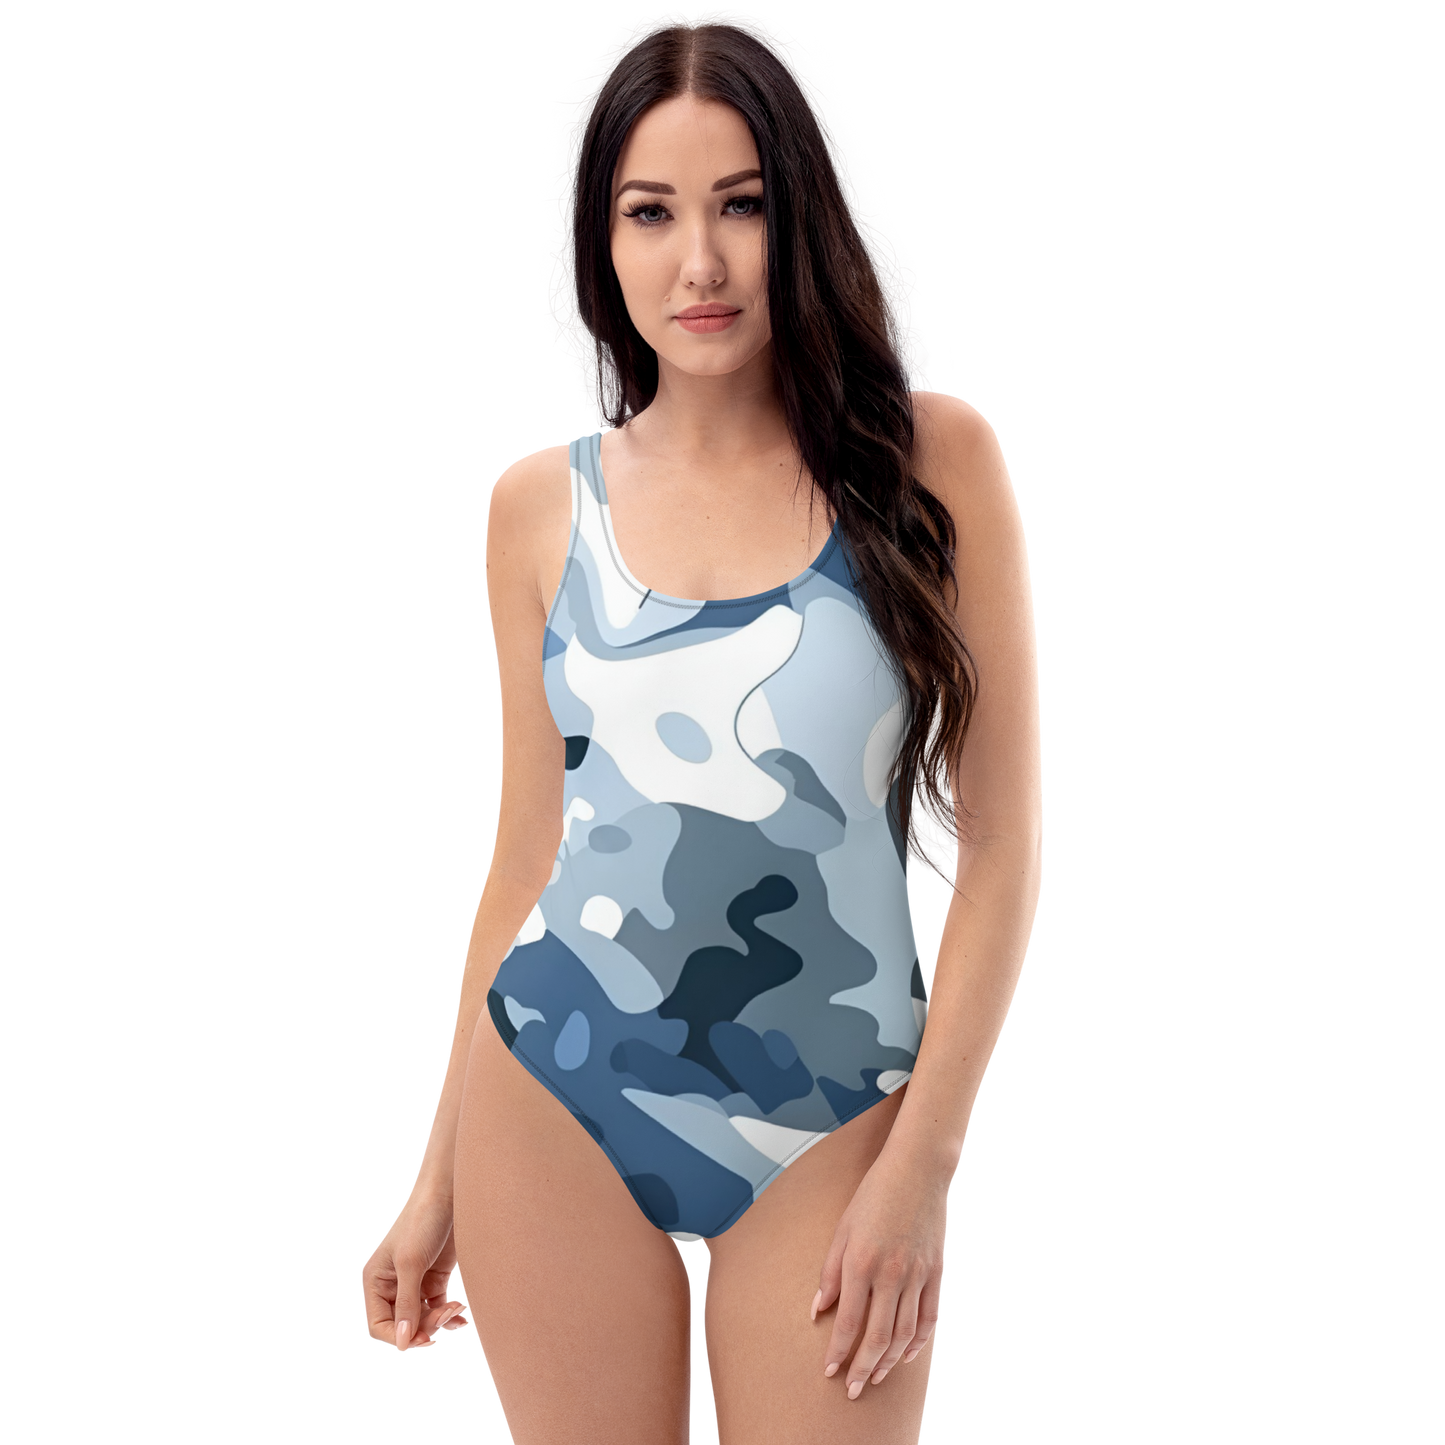 All-Over Print One-Piece Swimsuit